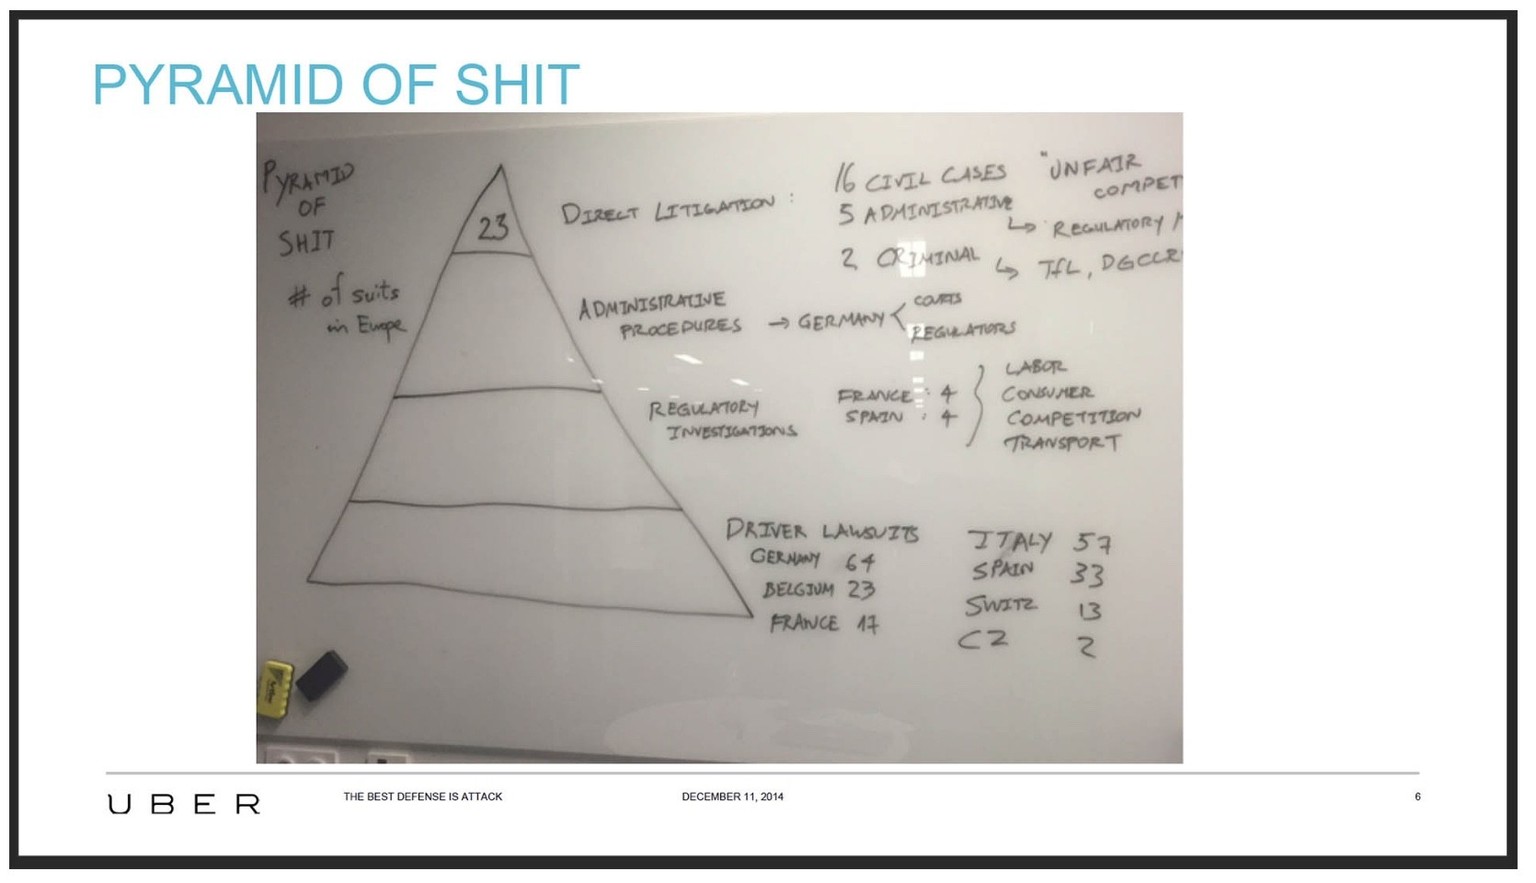 The Pyramid of Shit: So ging Uber bei seiner Expansion vor.